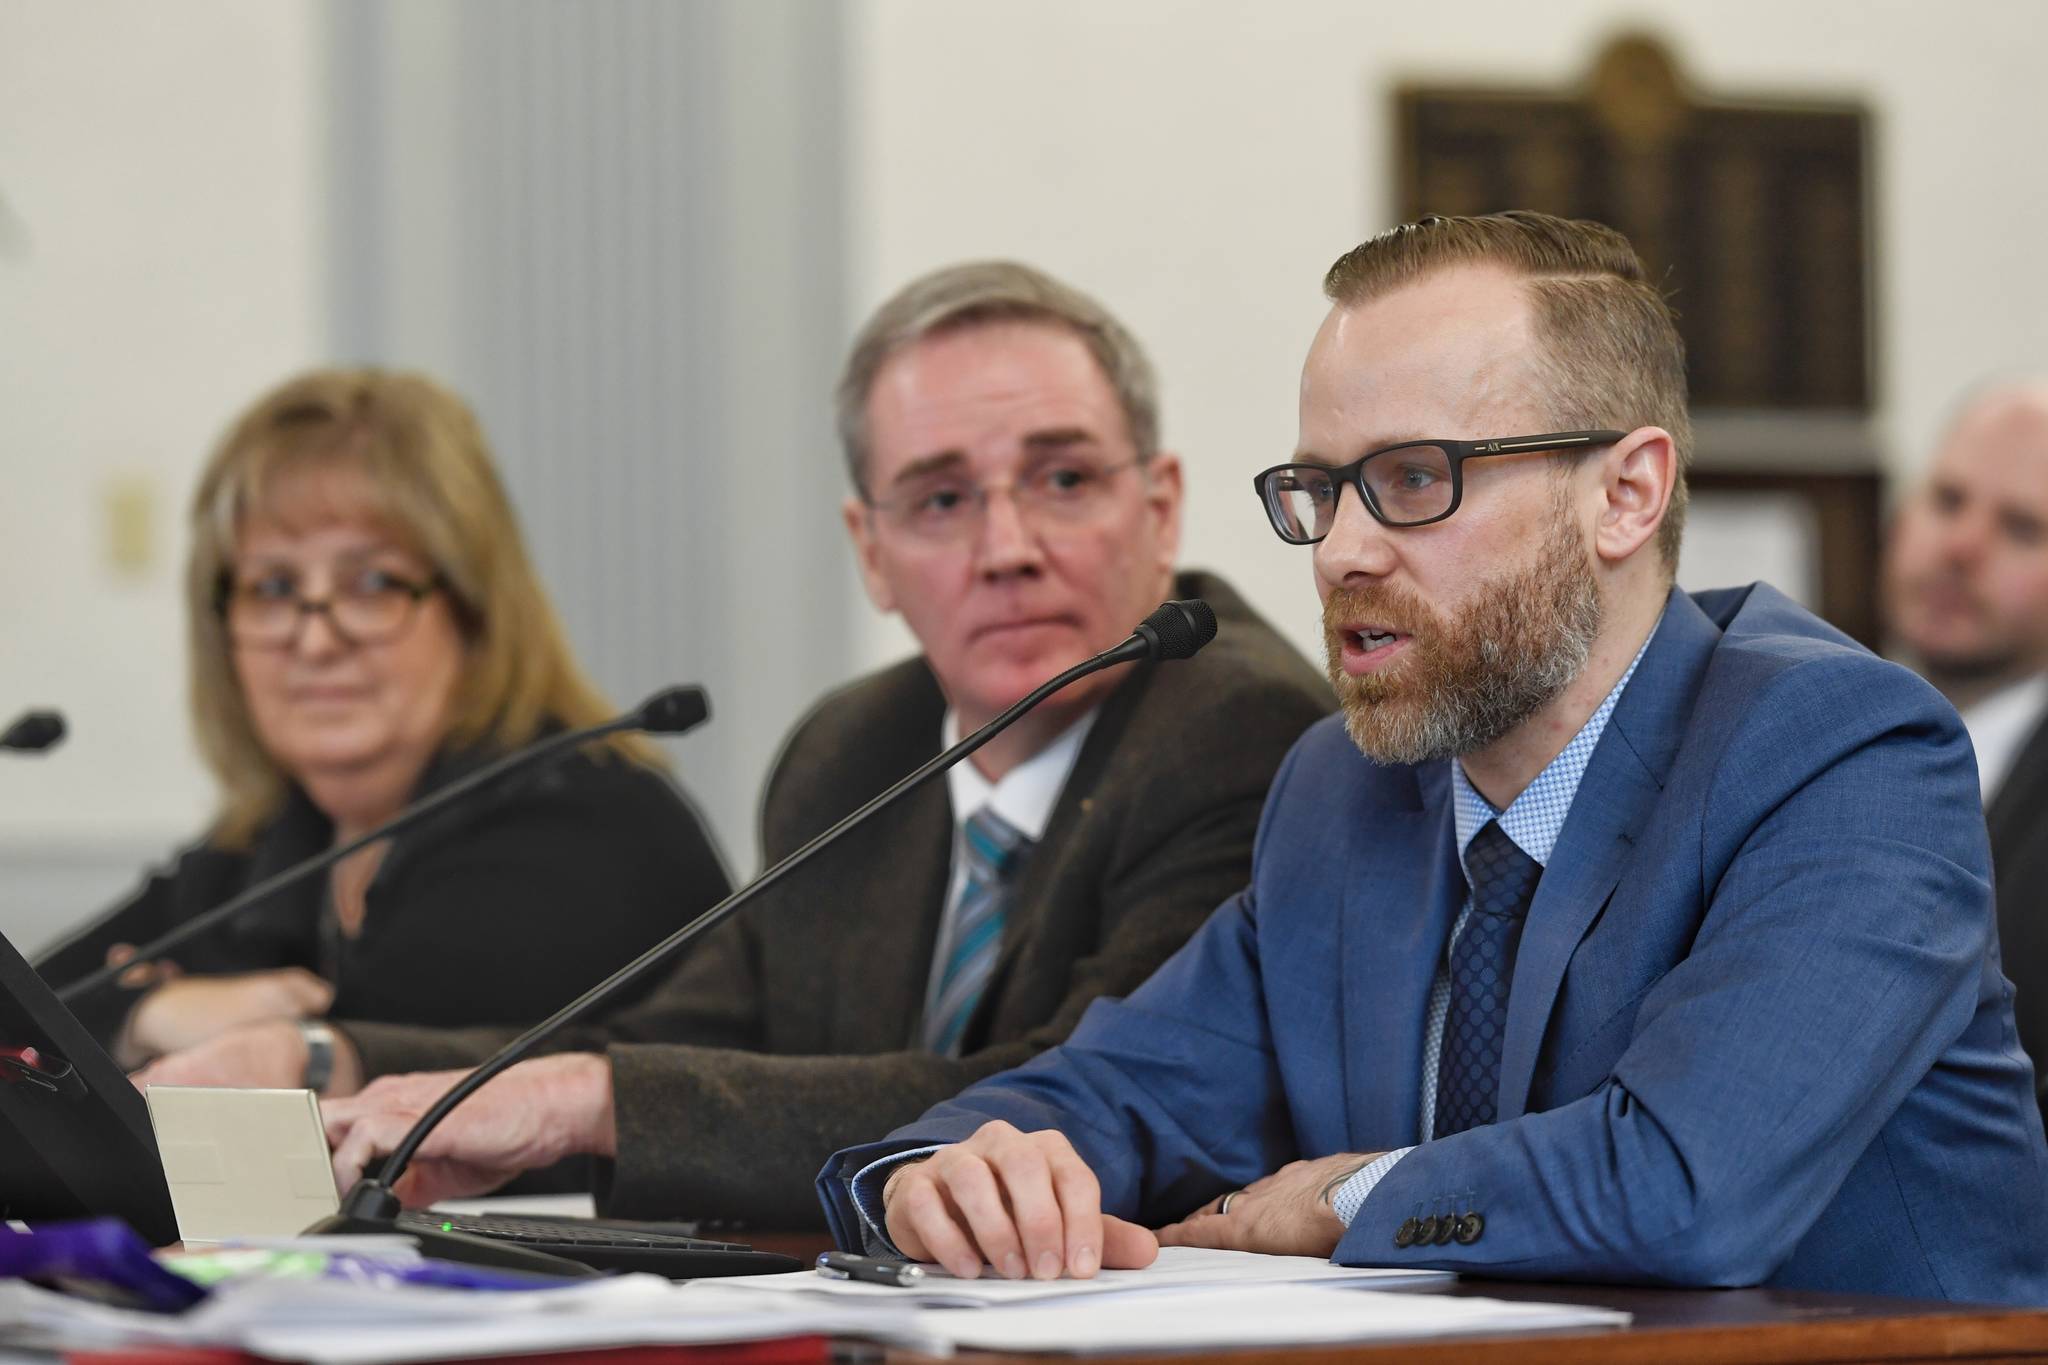 Andy Jones, Director of the Department of Health and Social Services’ Office of Substance Misuse, right, speak about the fiscal impacts of the opioids on the state along with Michael Duxbury, Deputy Commissioner of the Department of Public Safety, center, and Laura Brooks, Director of Health and Rehabilitation for the Department of Corrections, in front of the Senate Finance Committee on Thursday, Feb. 7, 2019. (Michael Penn | Juneau Empire)